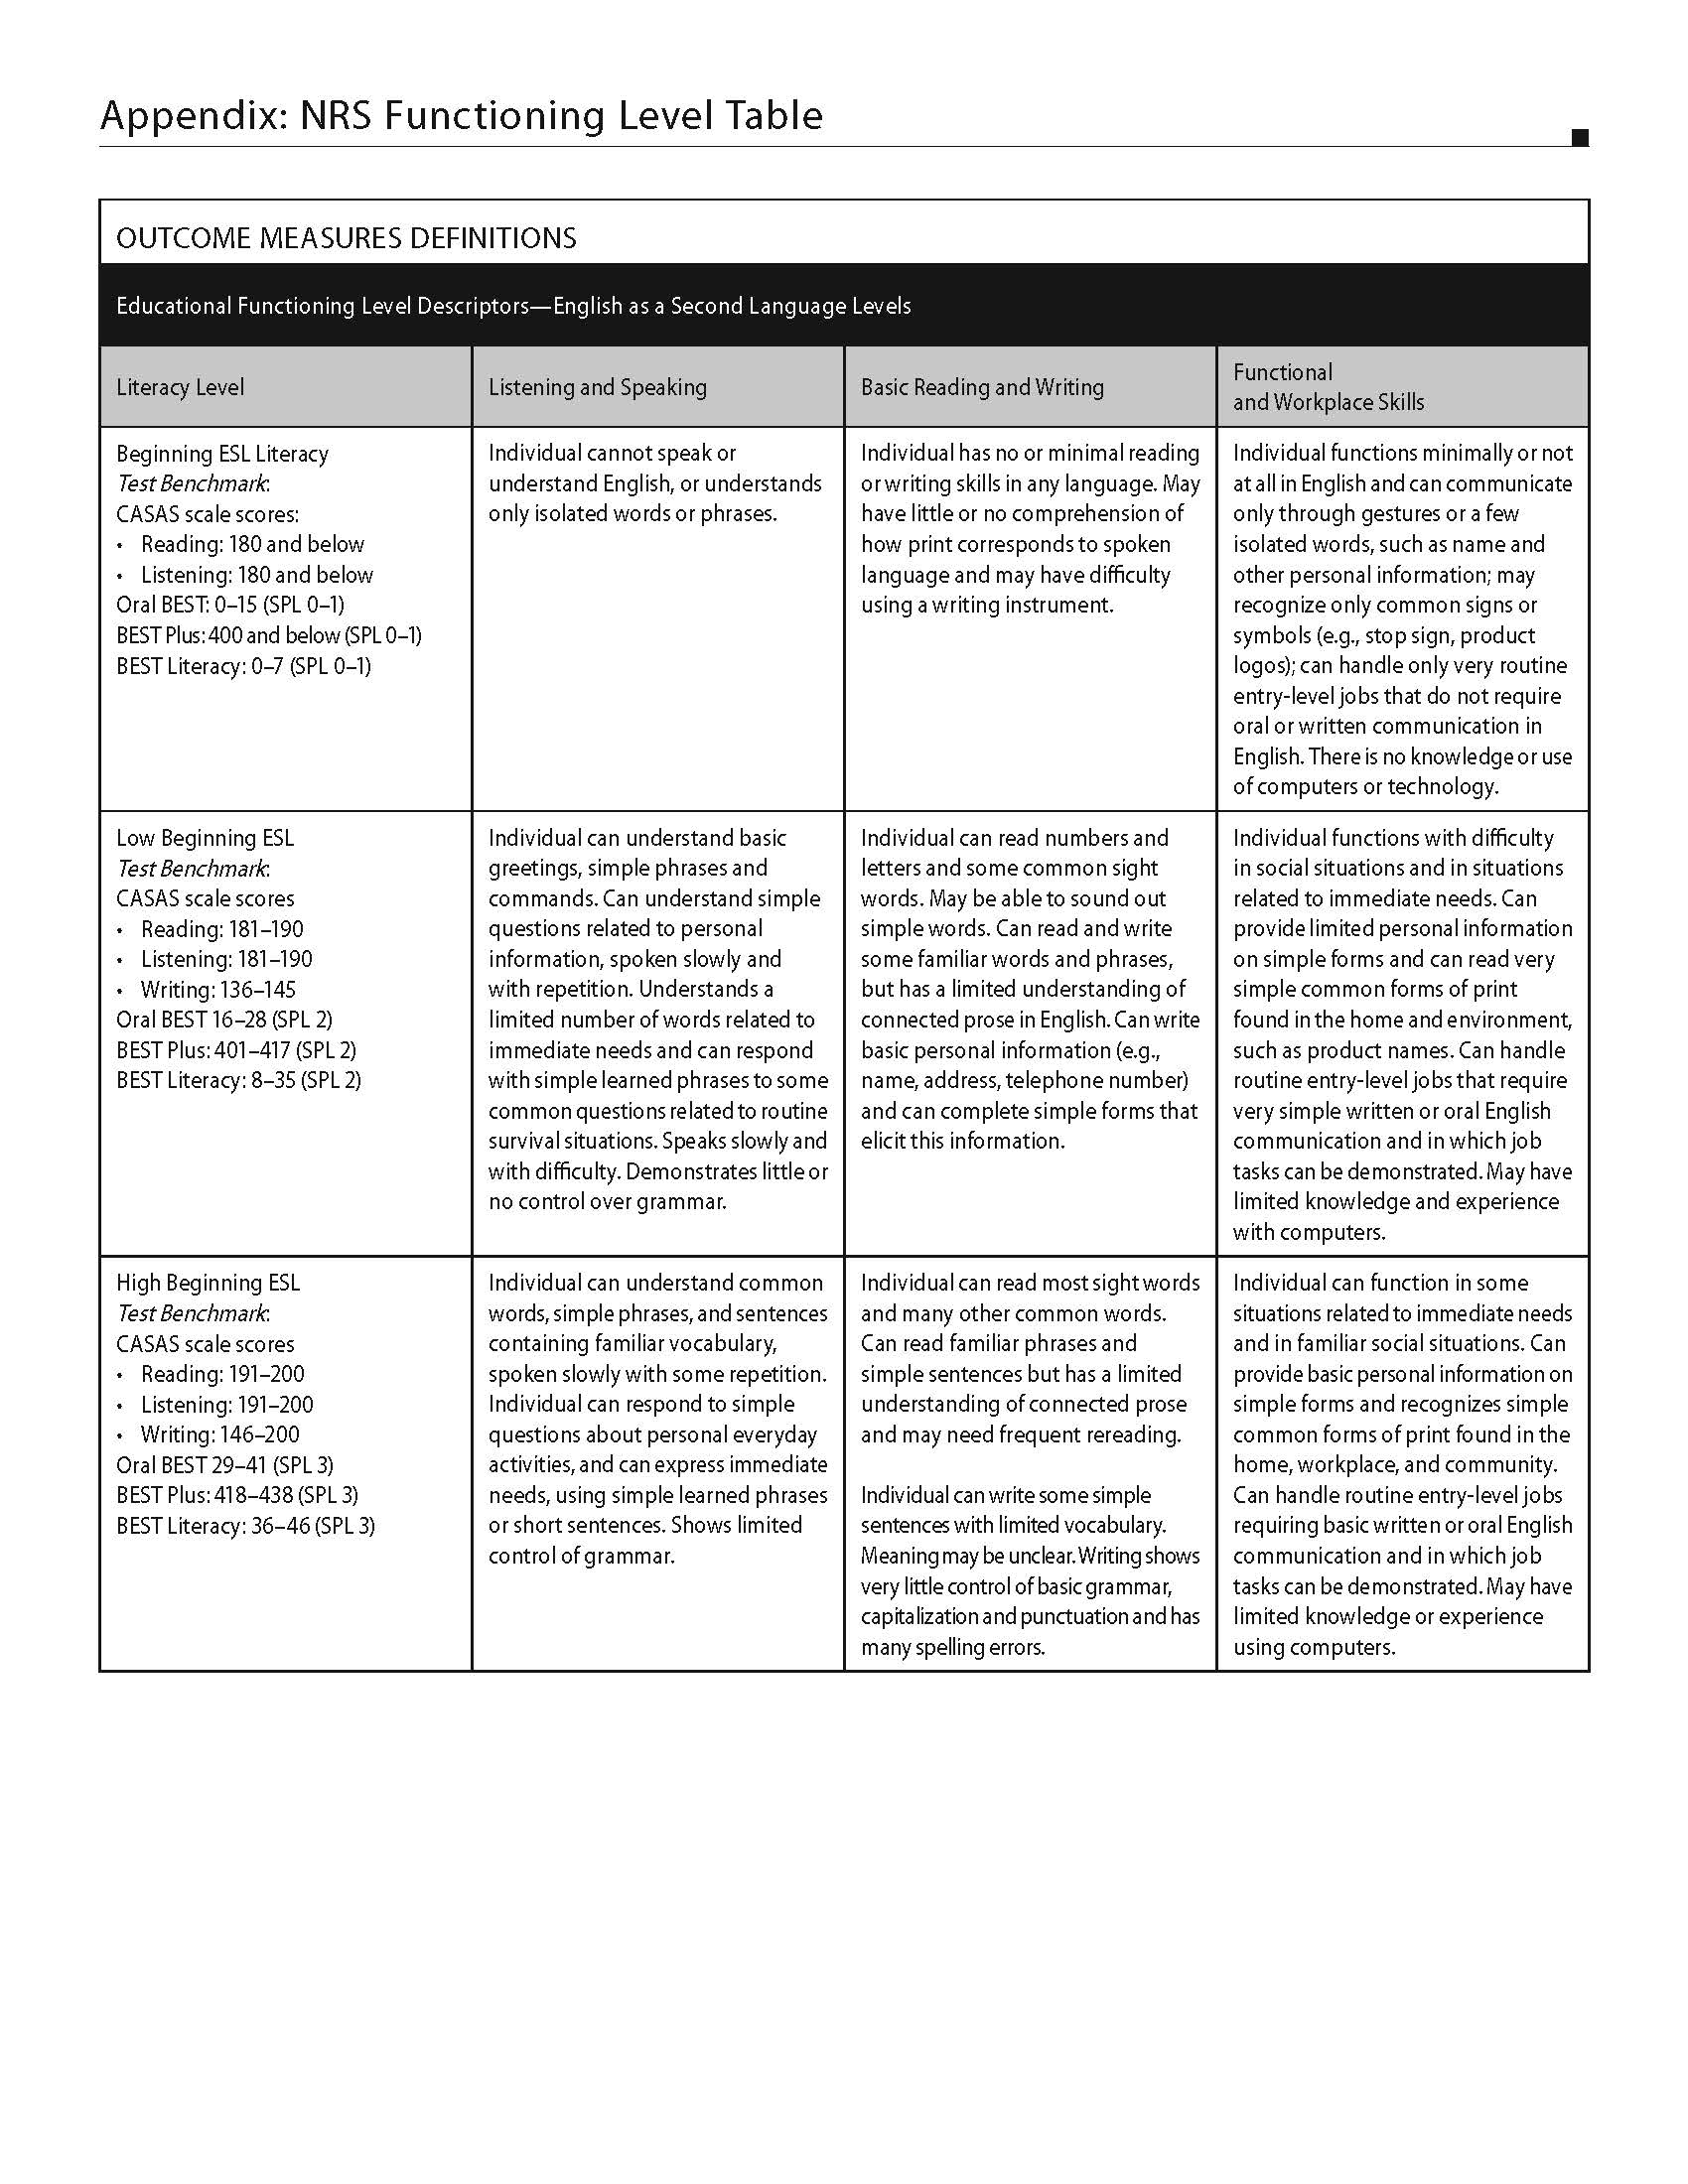 Understanding Standards for Adult ESL : The Literacy Coalition of